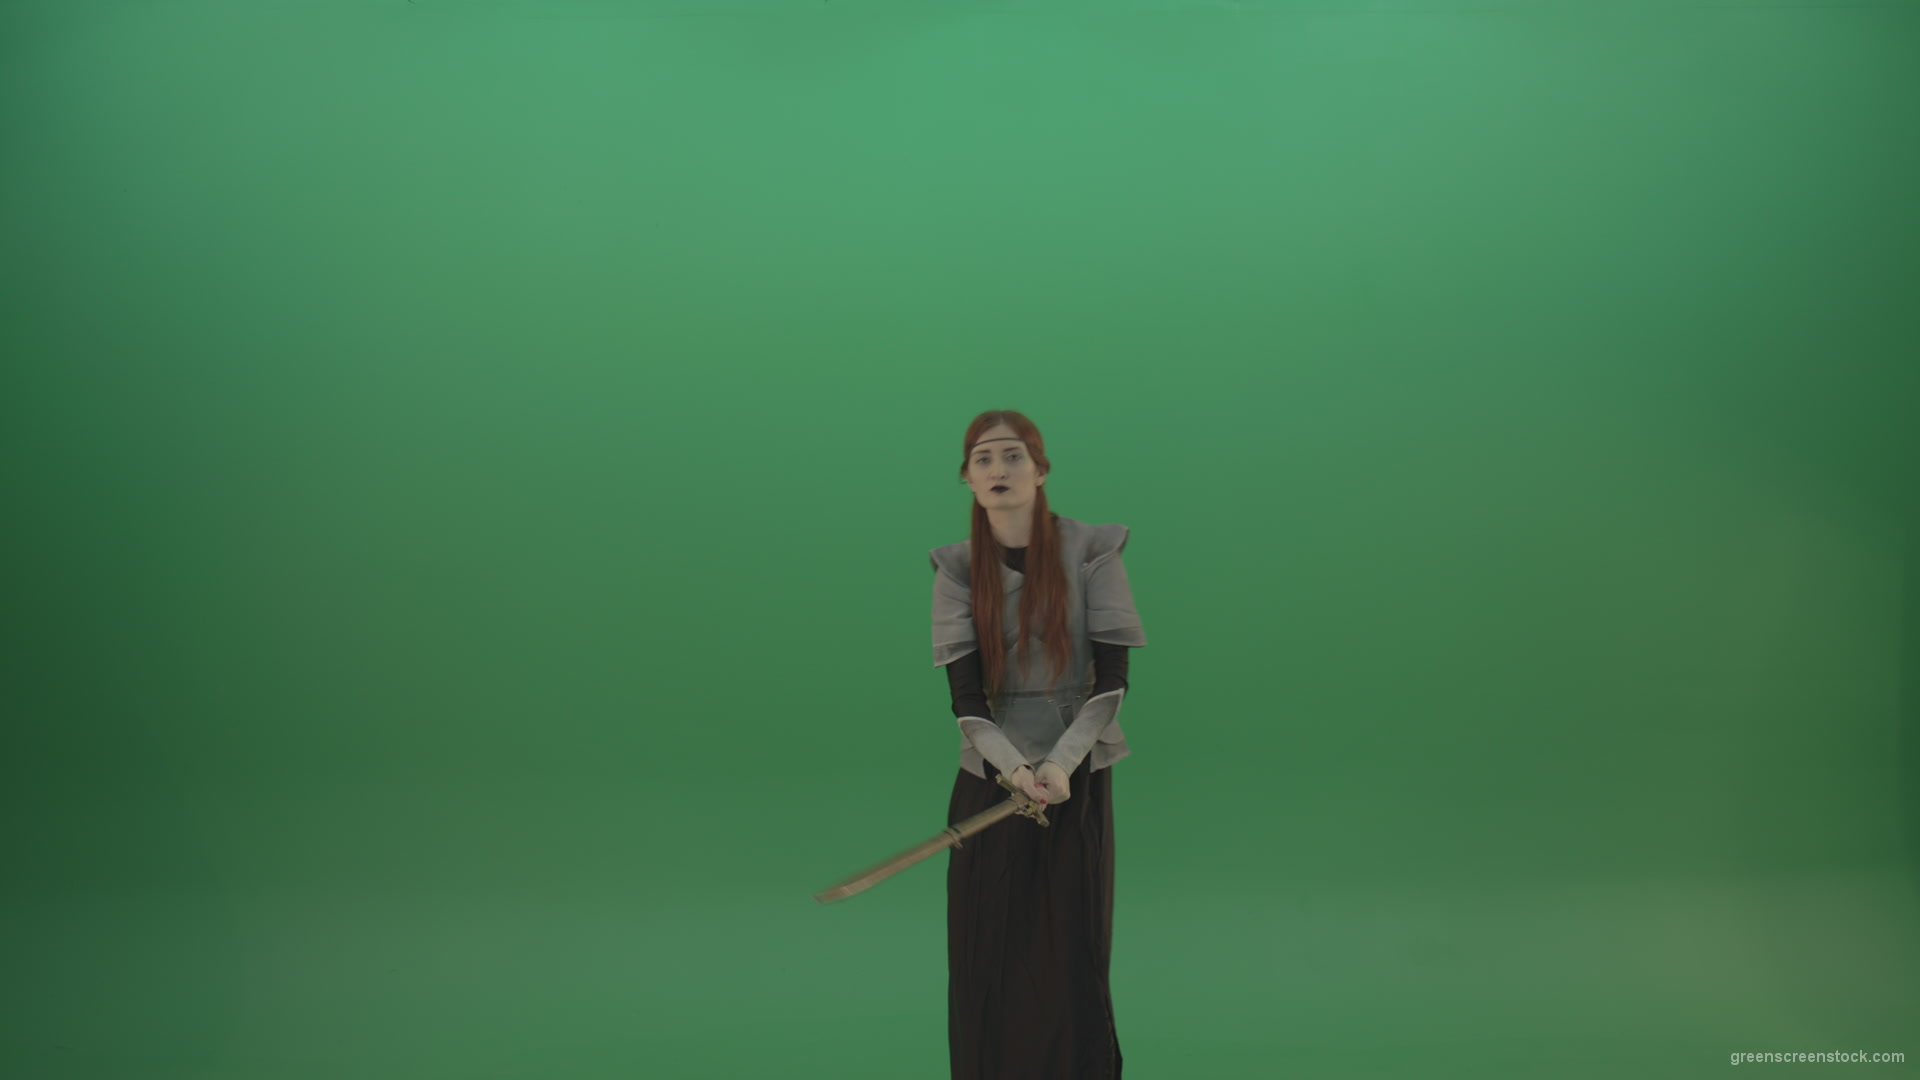 Swinging-on-a-green-background-with-a-sword-the-girl-gracefully-shows-her-strength_006 Green Screen Stock